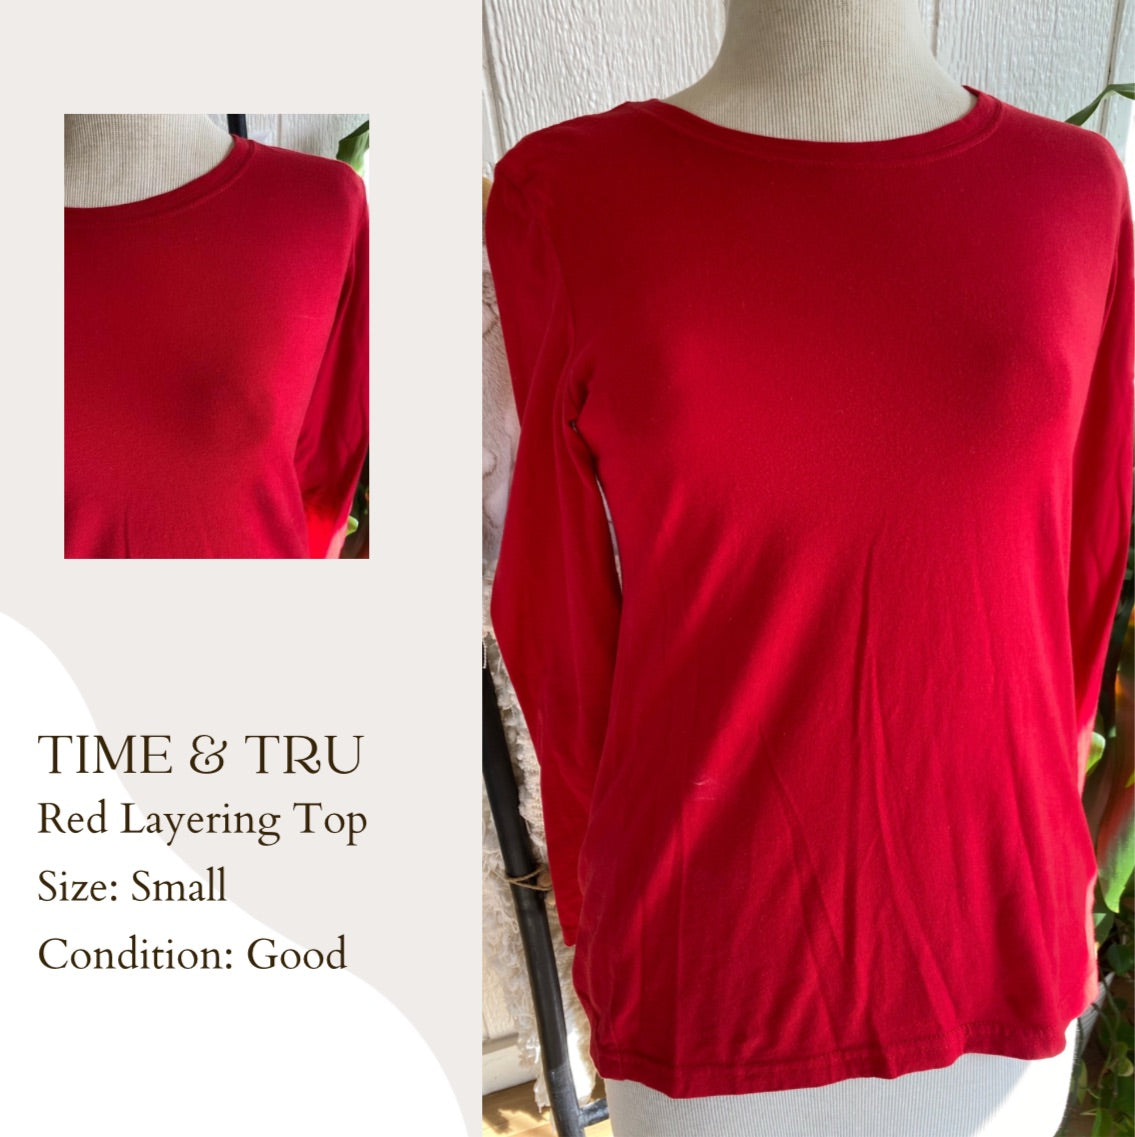 Time & Tru Red Layering Top